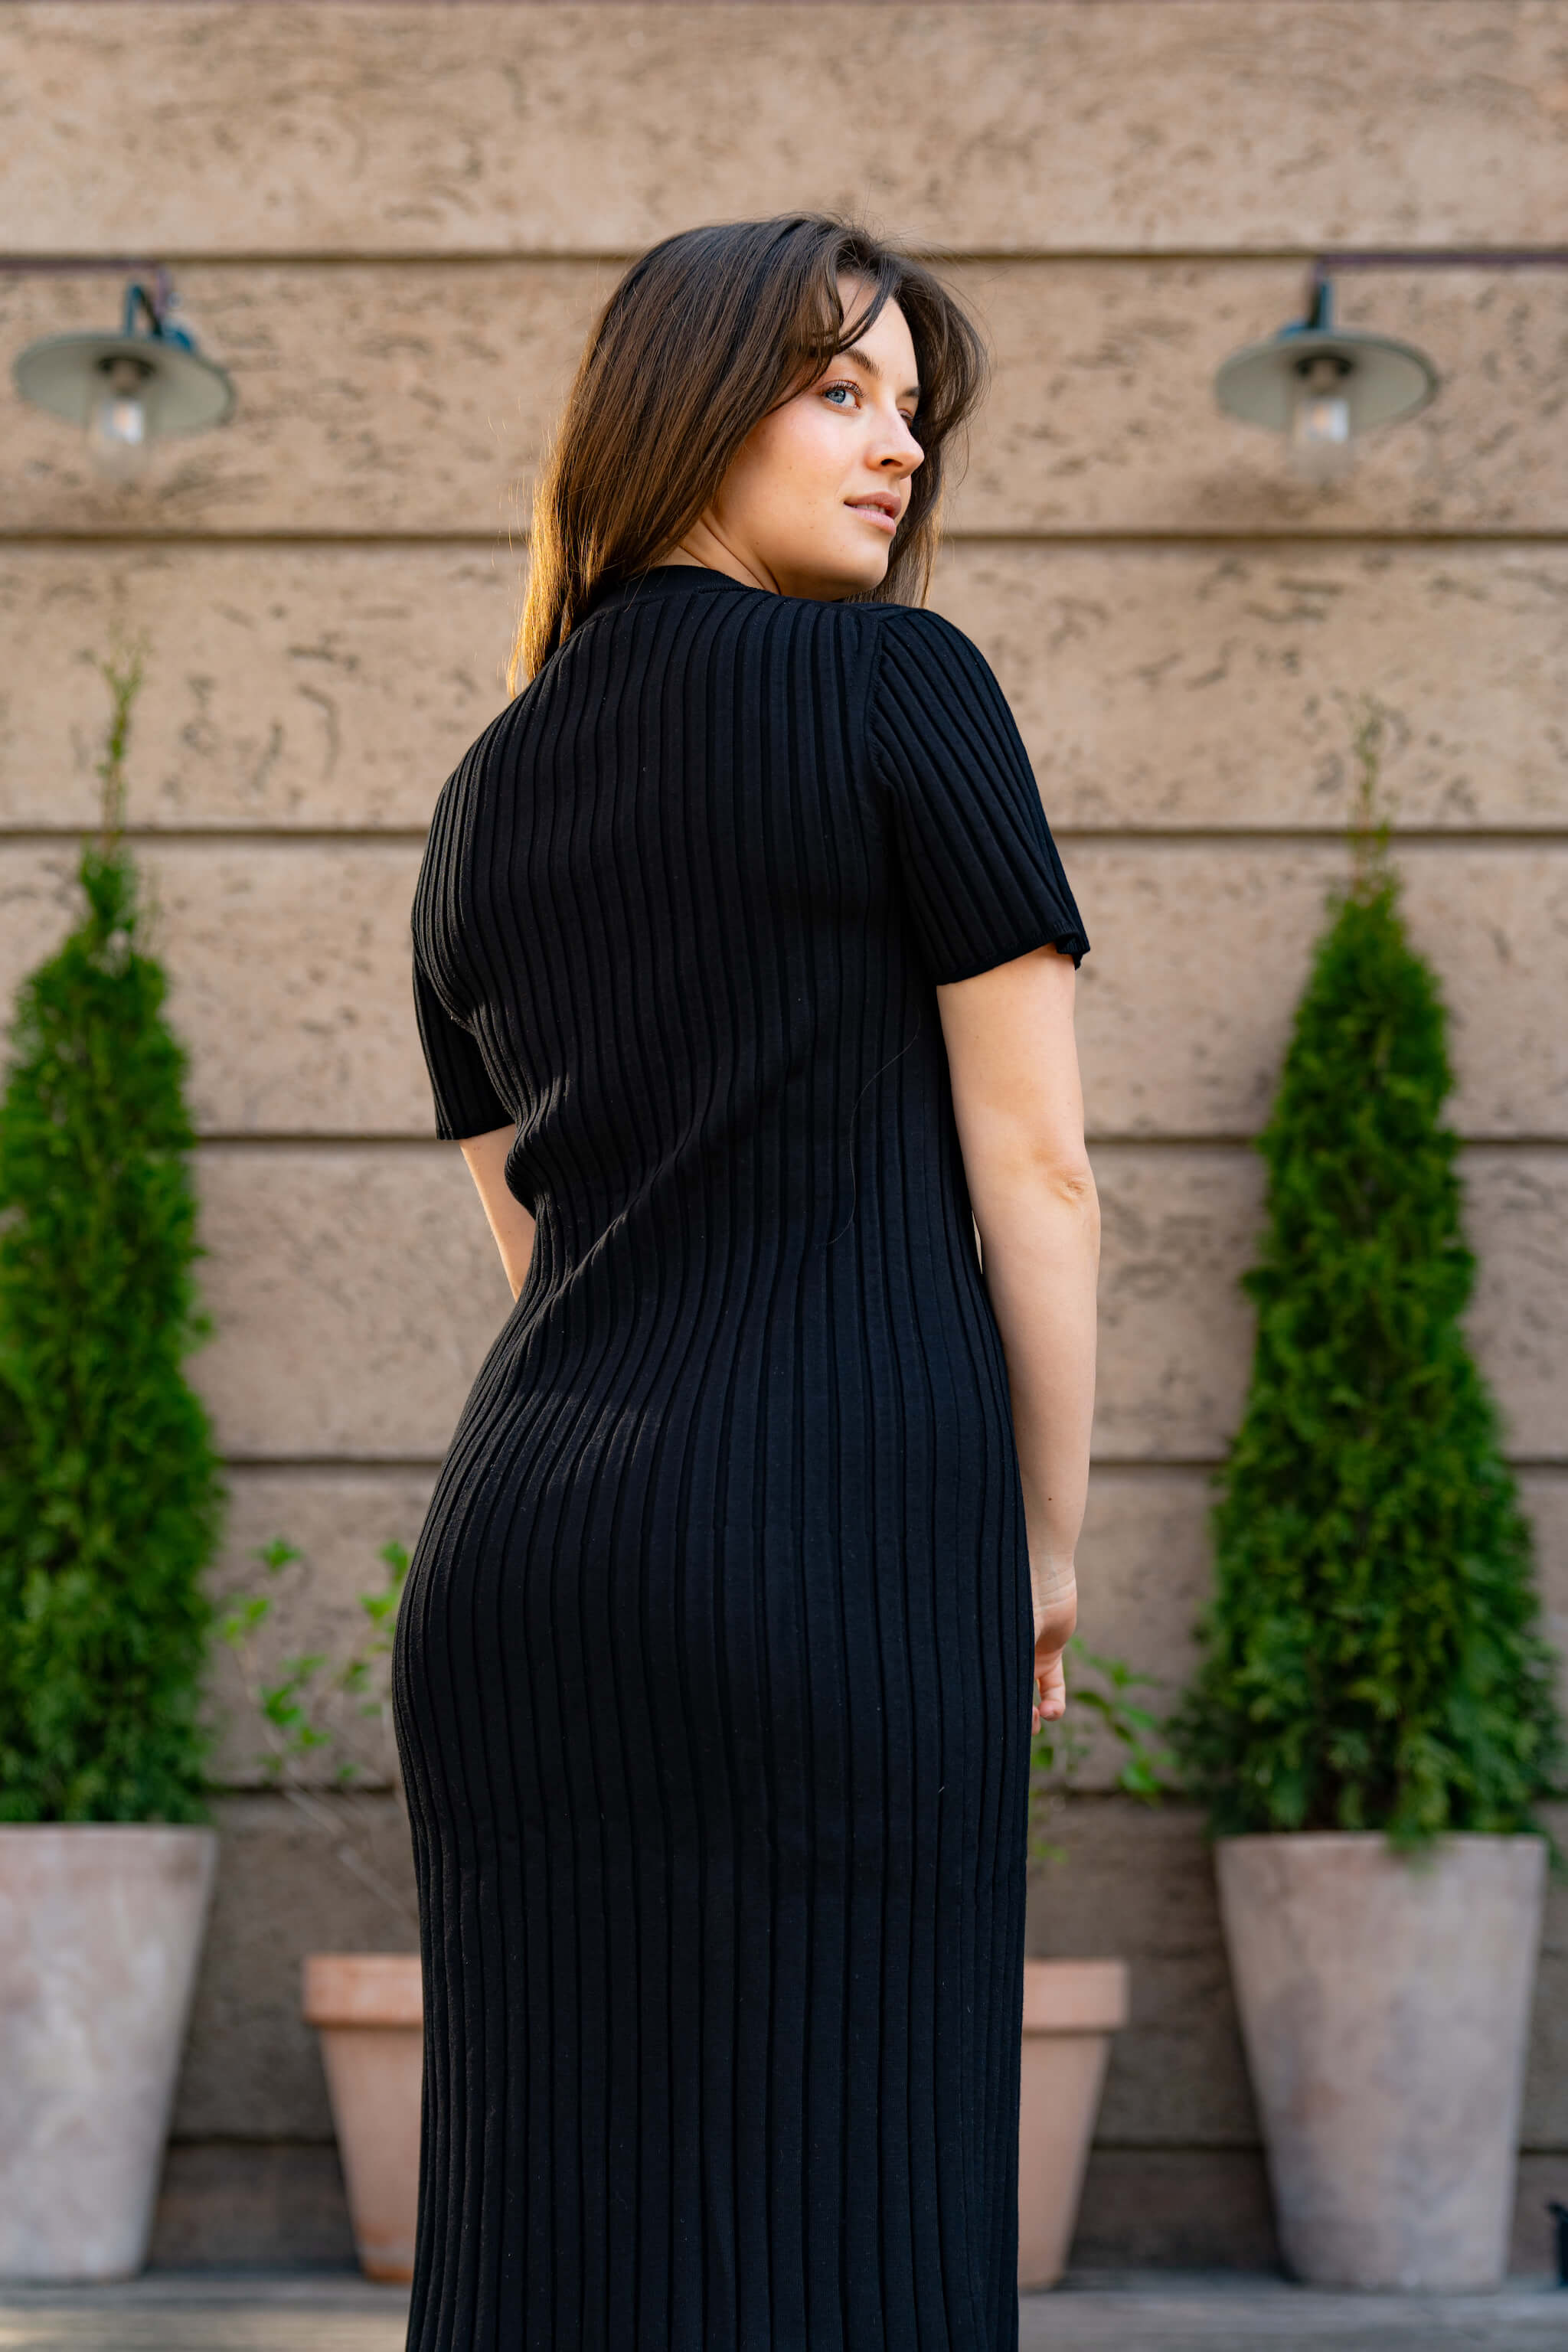 Model displaying Cyme Copenhagen's sustainable fashion line, a sleek black ribbed knit dress, embodying the elegant simplicity of Danish design available in inclusive sizes.